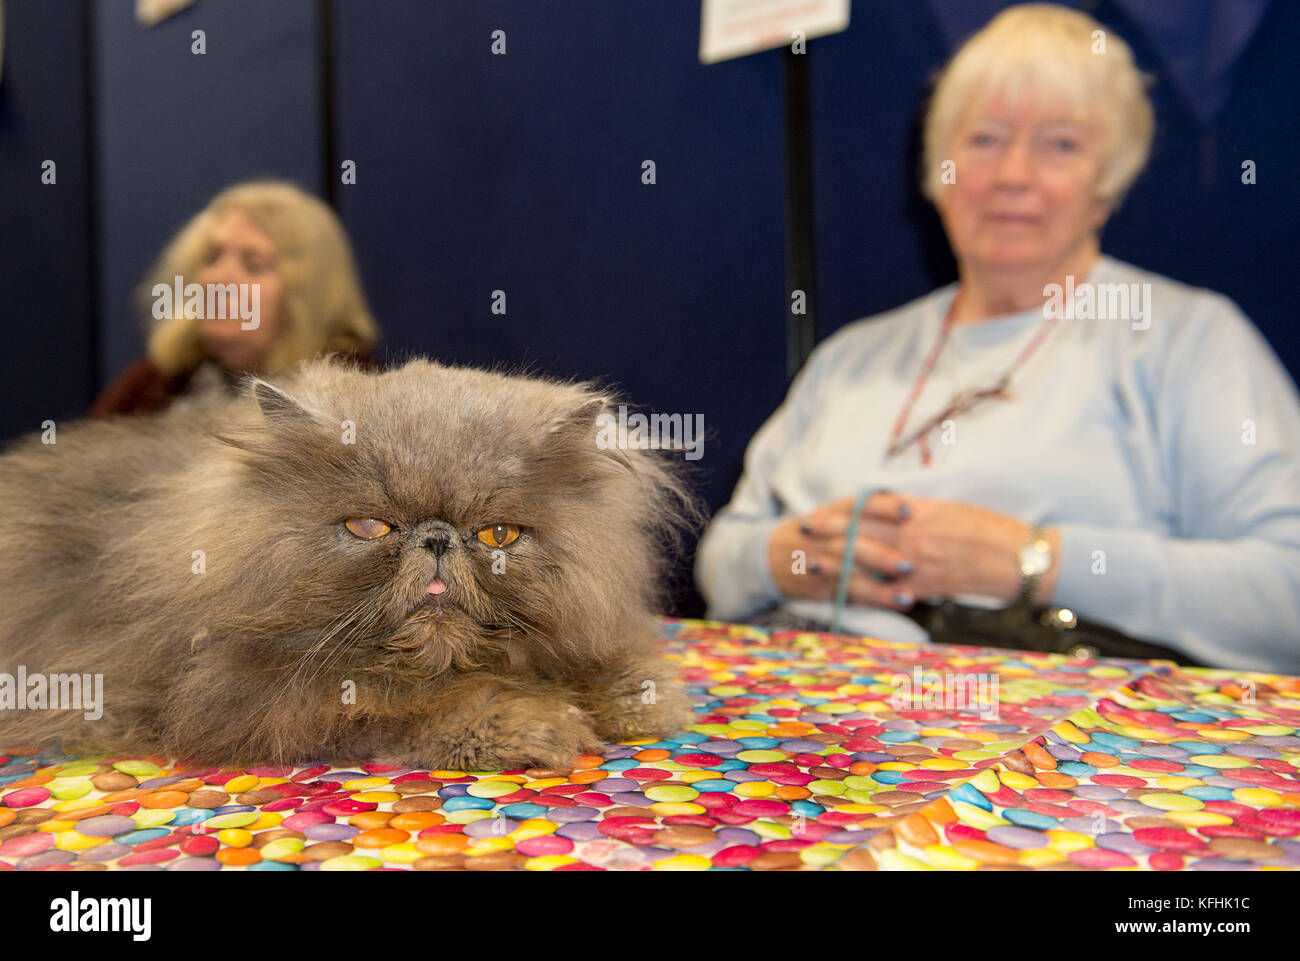 Birmingham, UK. 28th October, 2017. 45 different breeds of cats 661 Pedigree cats and 70 none pedigree cats were on show today  at the 41ST GCCF SUPREME CAT SHOW.Held at the National Exhibition Centre Birmingham Saturday 28th October 2017 NOTE TO DESKS:  All images remain  copyright.  Photo Credit: Rob Leyland/Alamy Live News Stock Photo